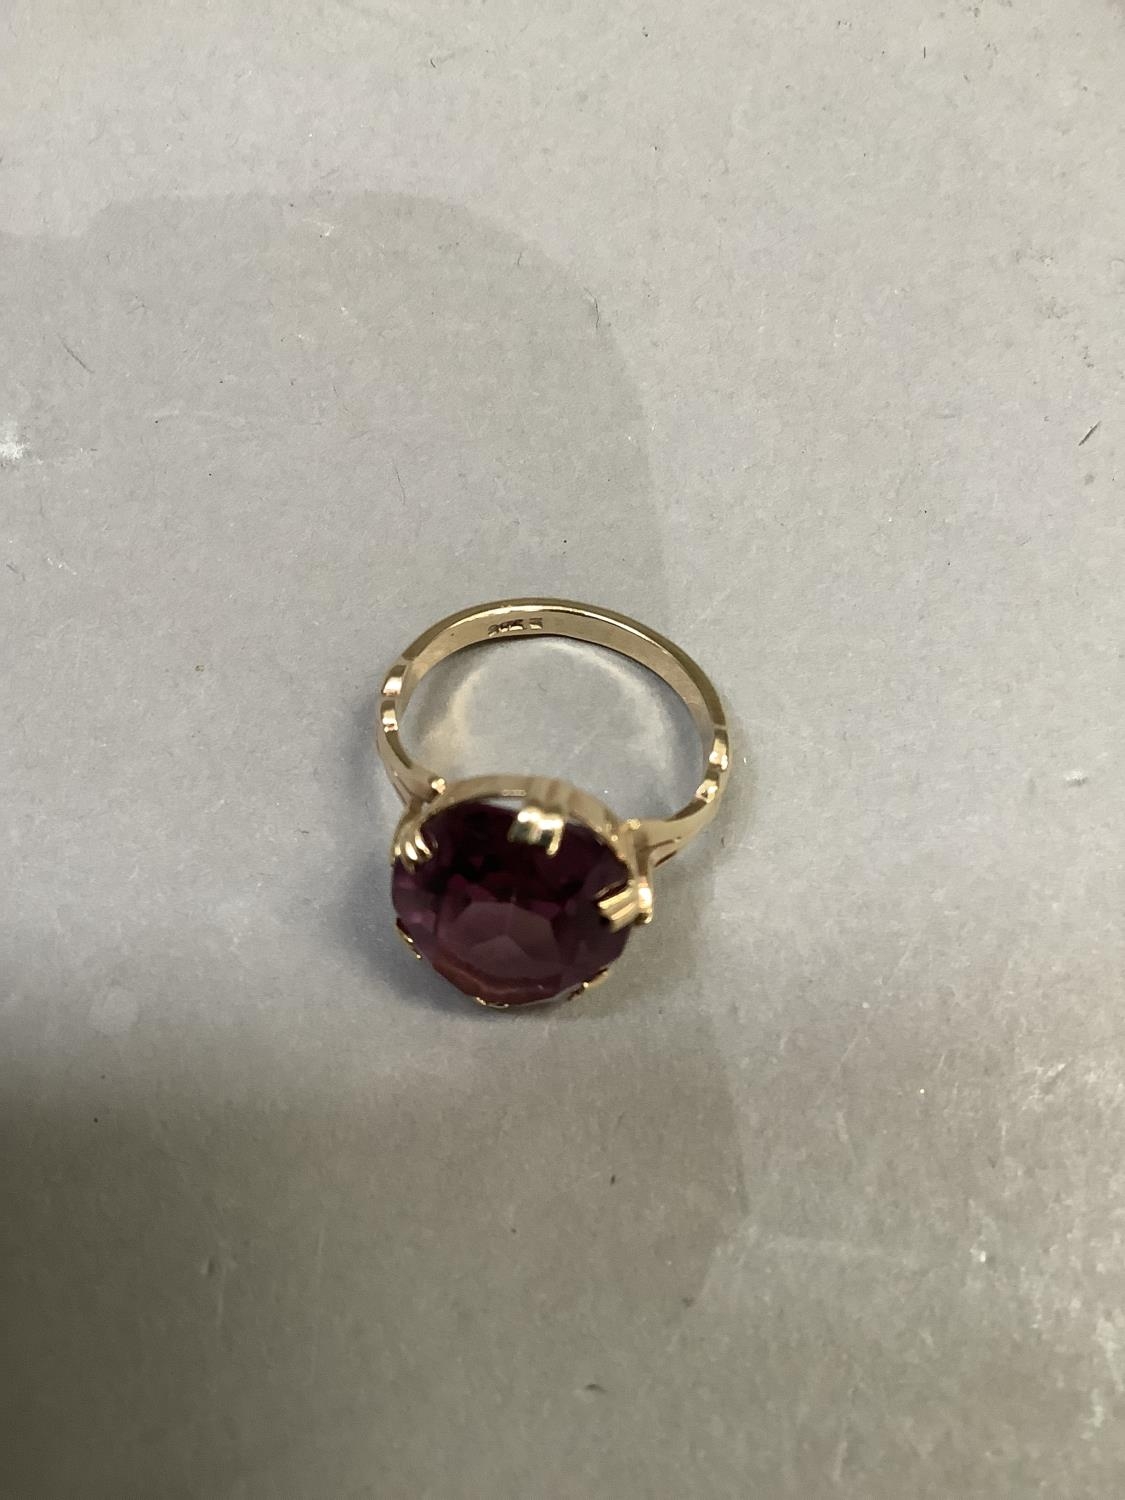 A dress ring c.1950 claw set in 9ct gold with an oval faceted purple paste, approximate weight 4g